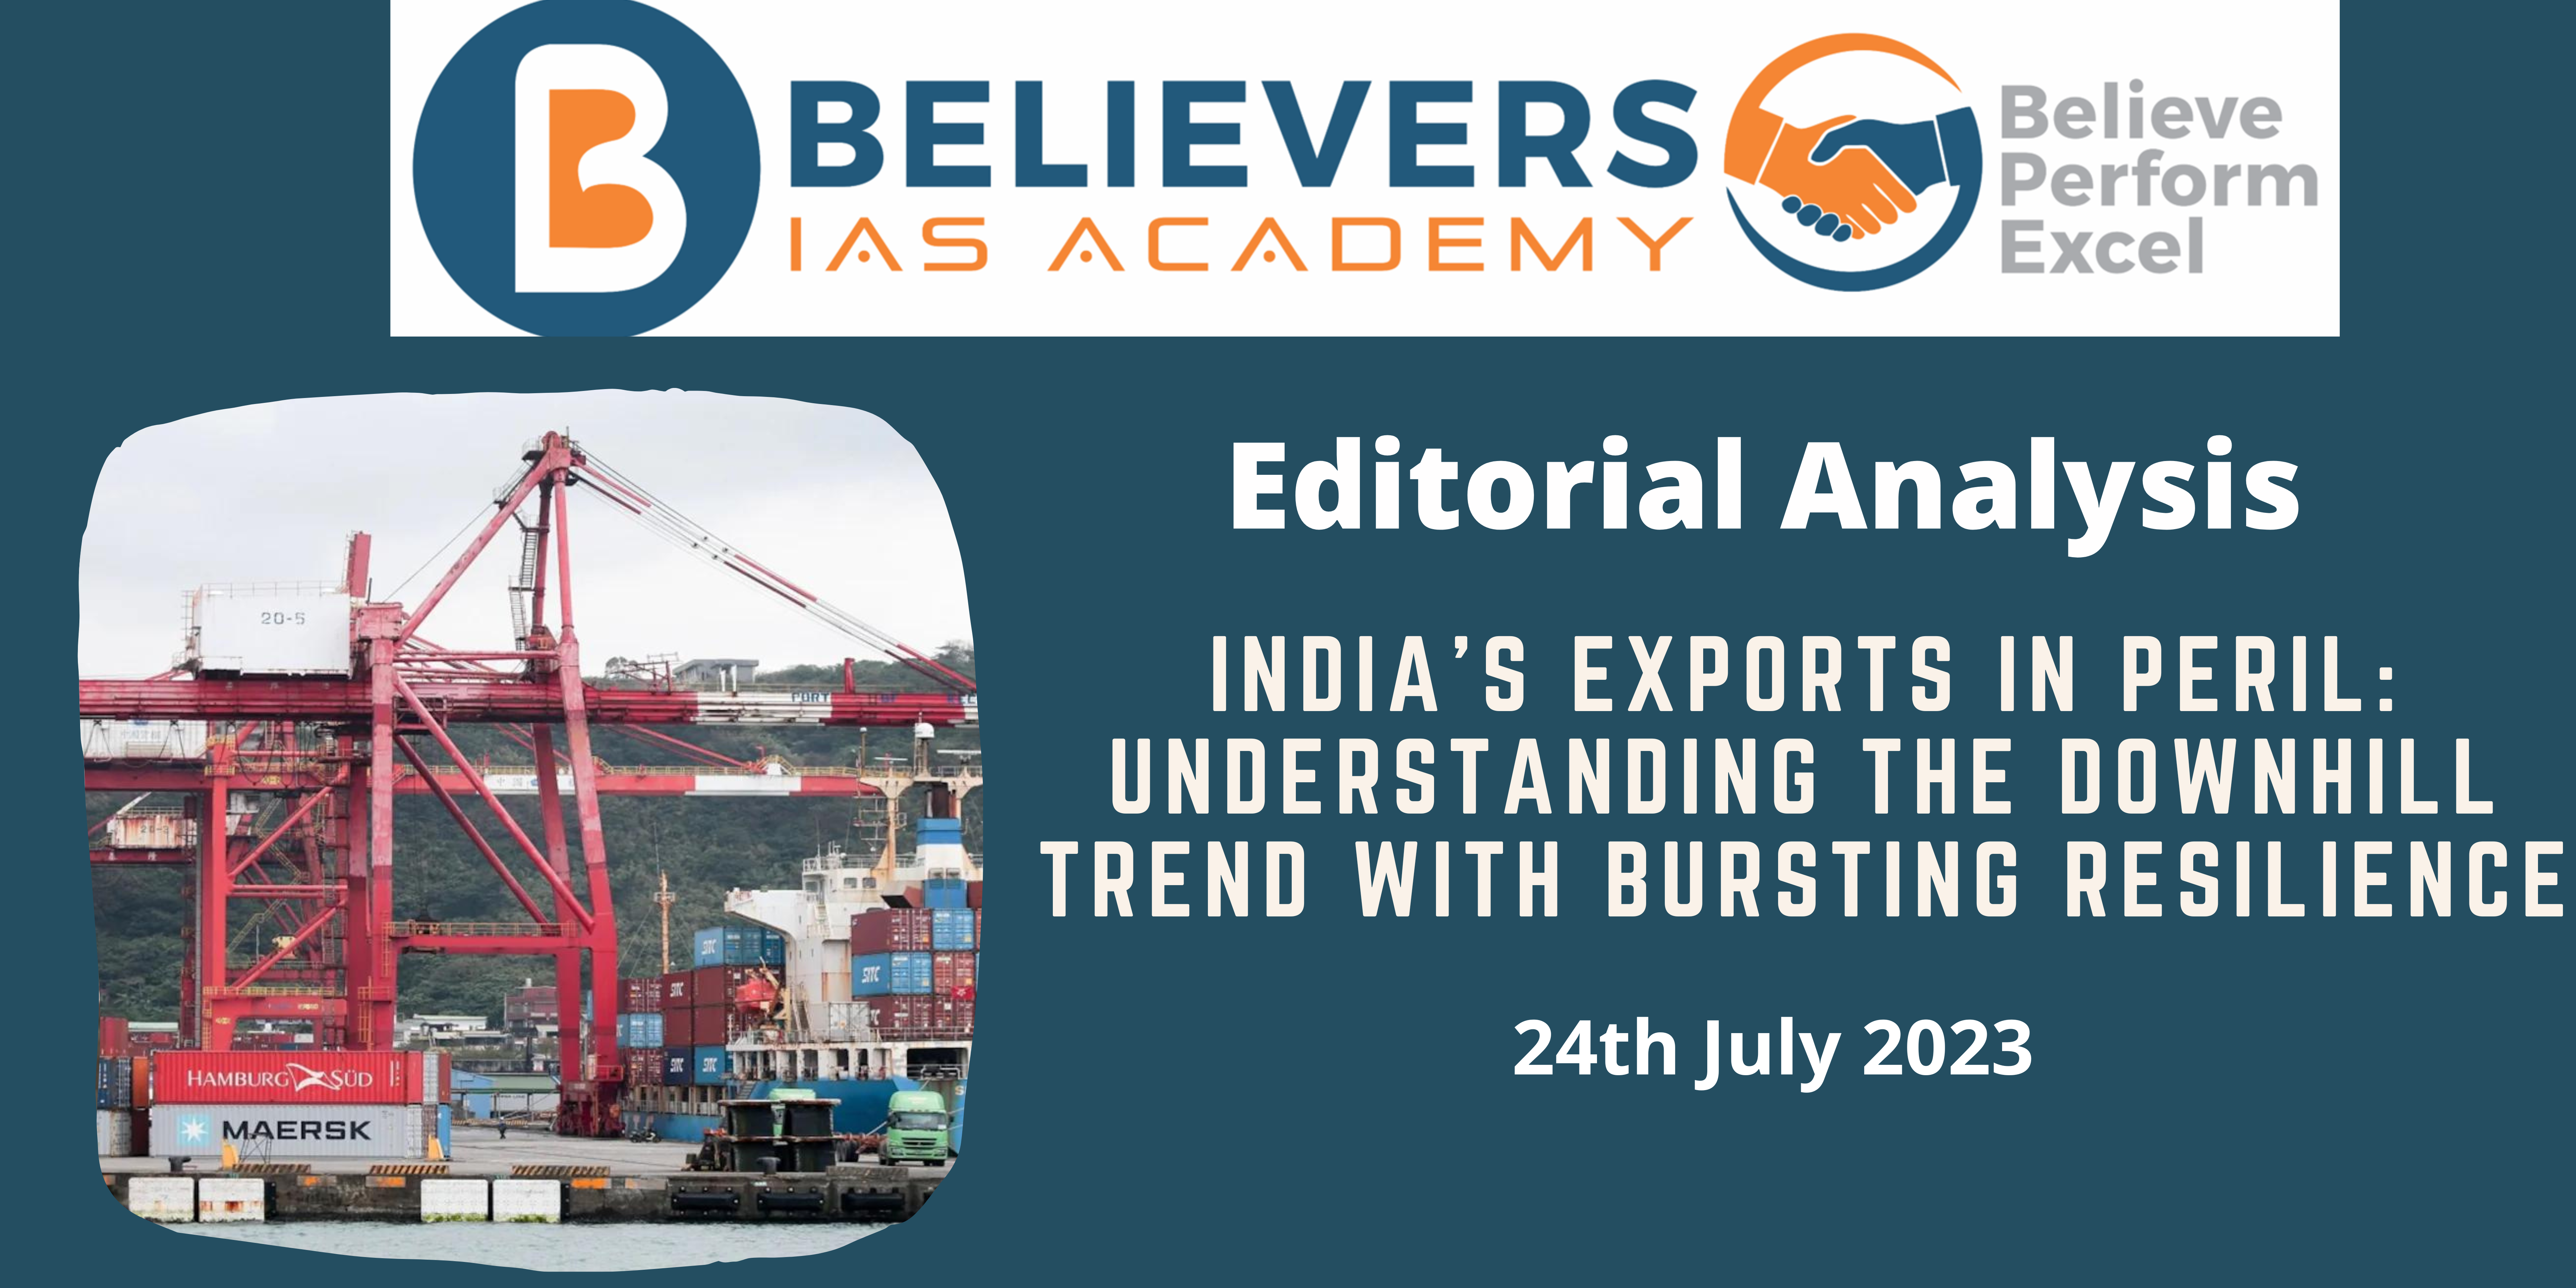 India's Exports in Peril: Understanding the Downhill Trend with Bursting Resilience